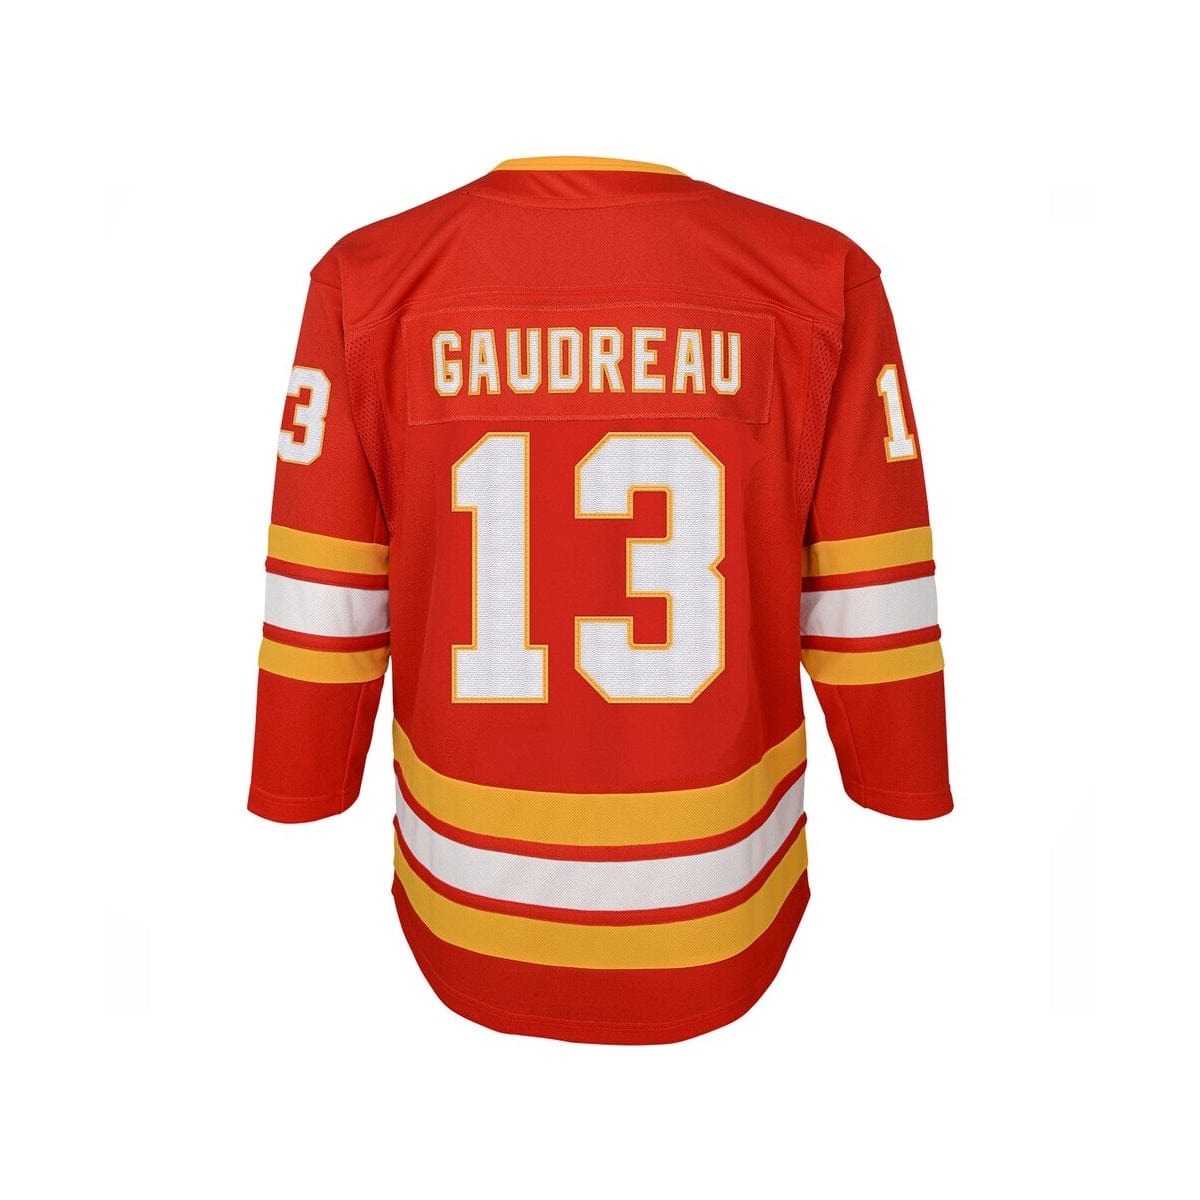 Official NHL Calgary Flames Gaudreau Hockey Jersey for Sale in